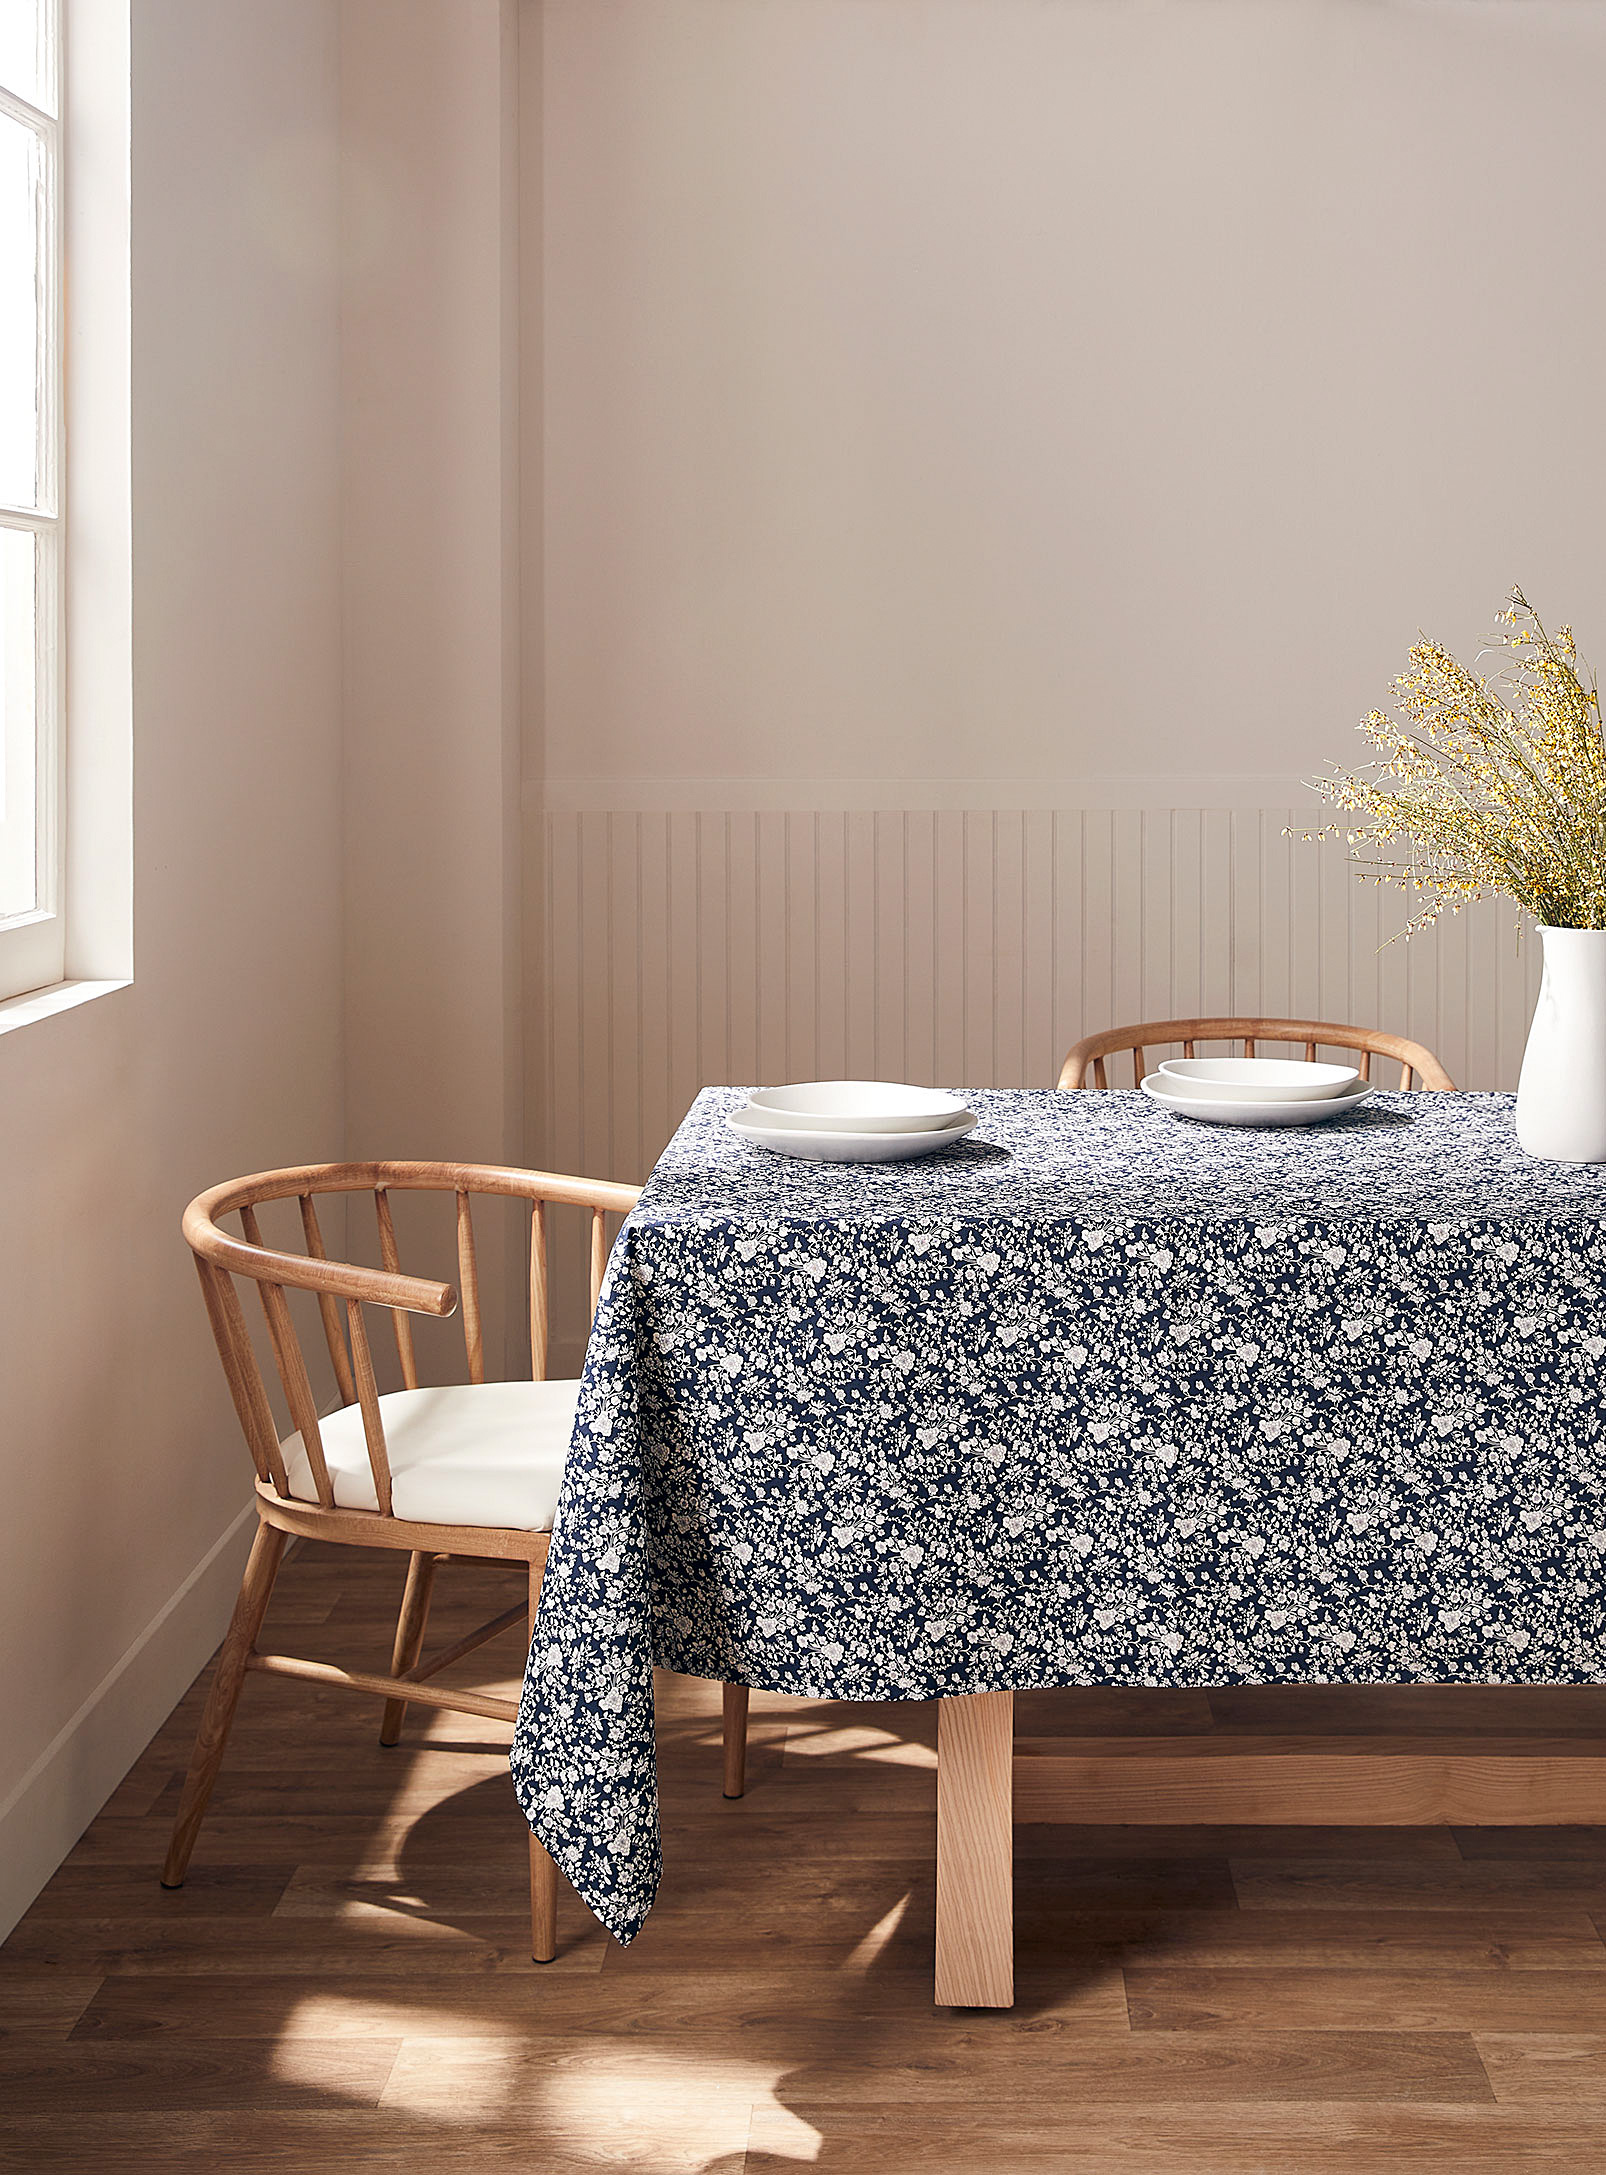 Simons Maison Summer Blooms Tablecloth Made With Liberty Fabric In Patterned Blue